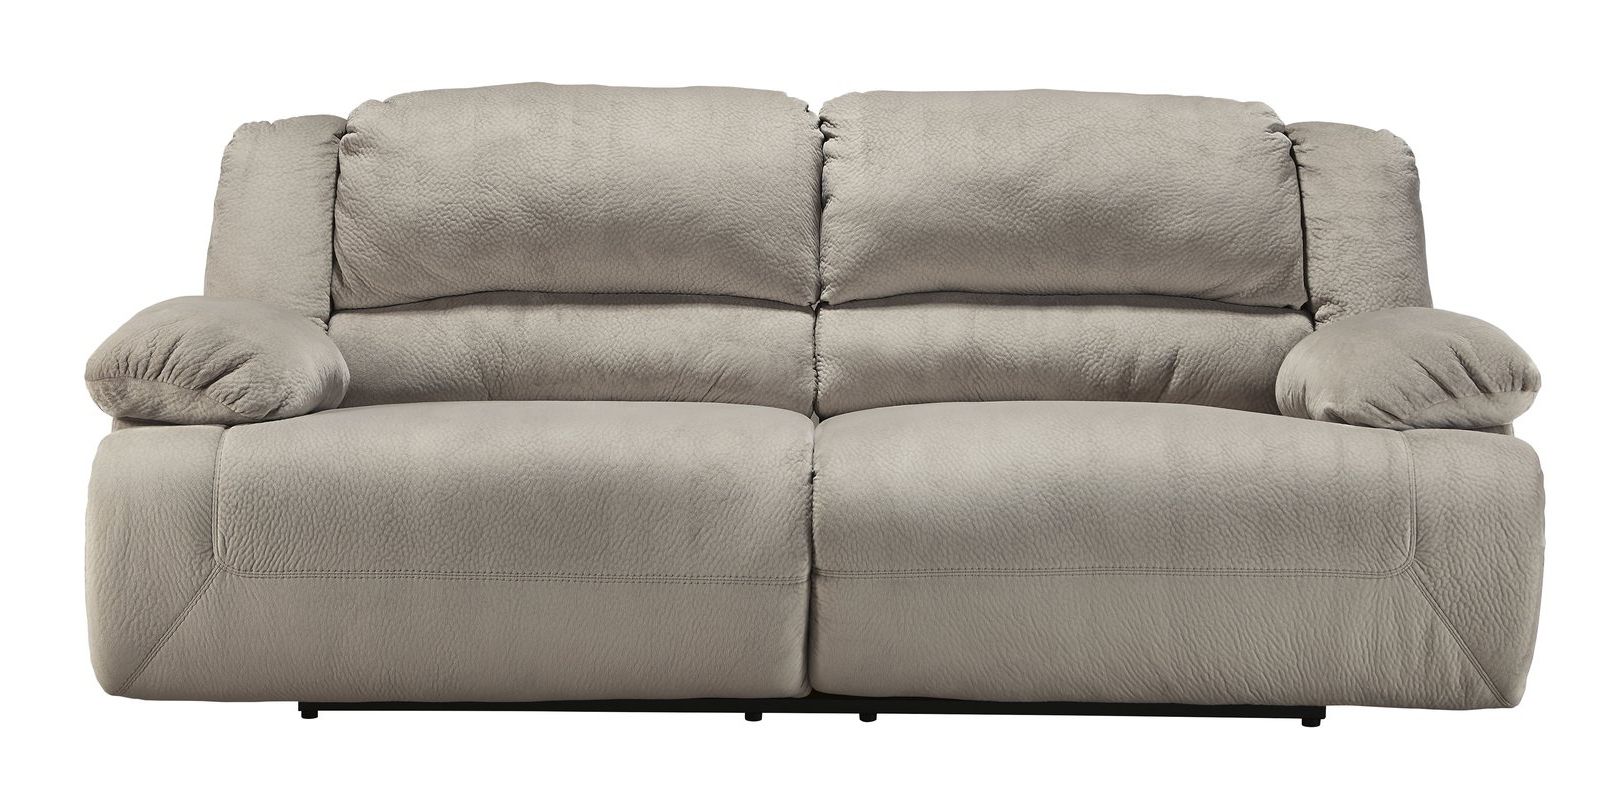 2 Seat Recliner Sofas Intended For Current Signature Designashley Tolette 2 Seat Reclining Sofa & Reviews (View 1 of 20)